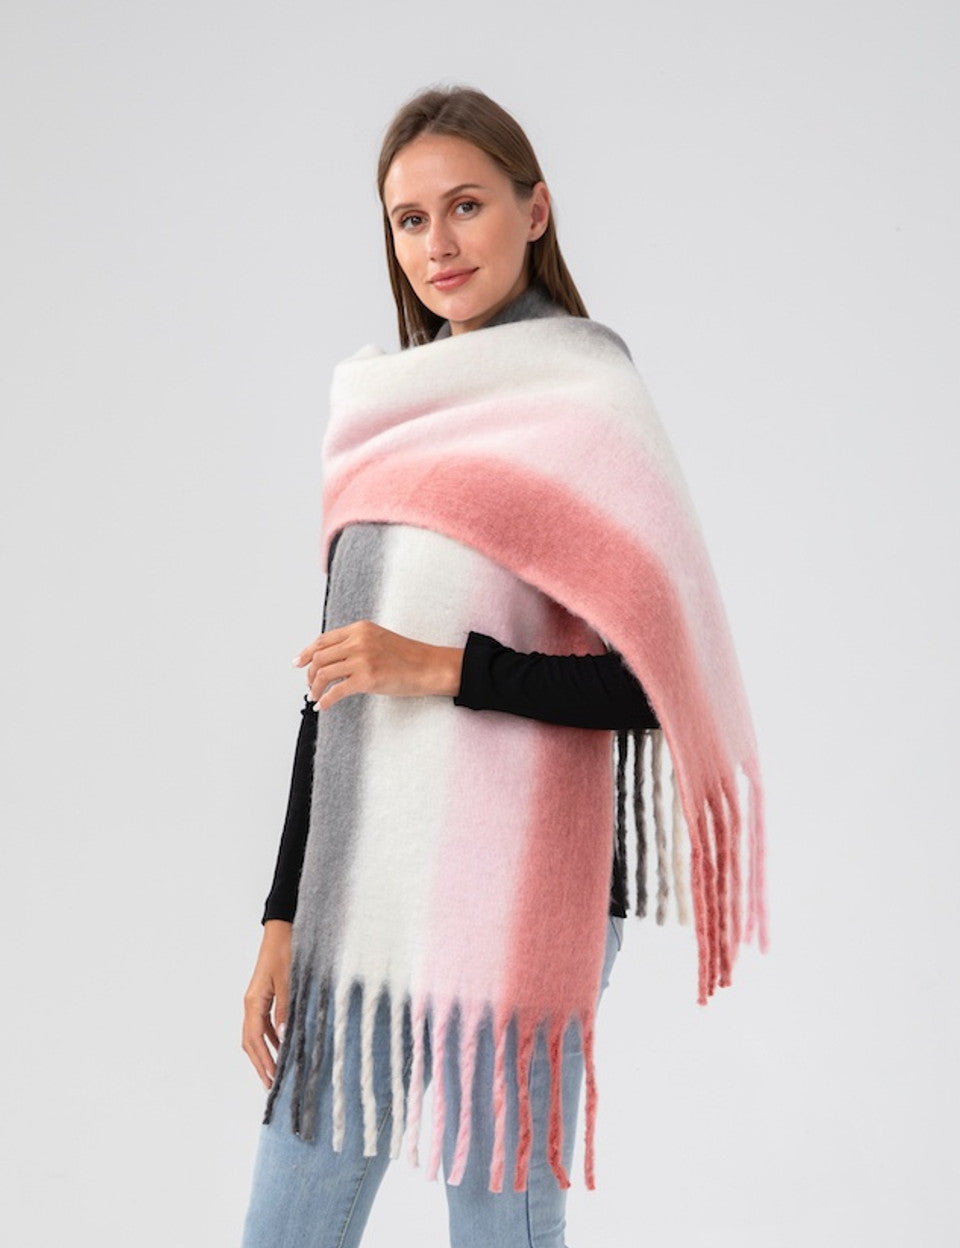 Pink & Grey Tone Blanket Scarf (Only 1 Left!)